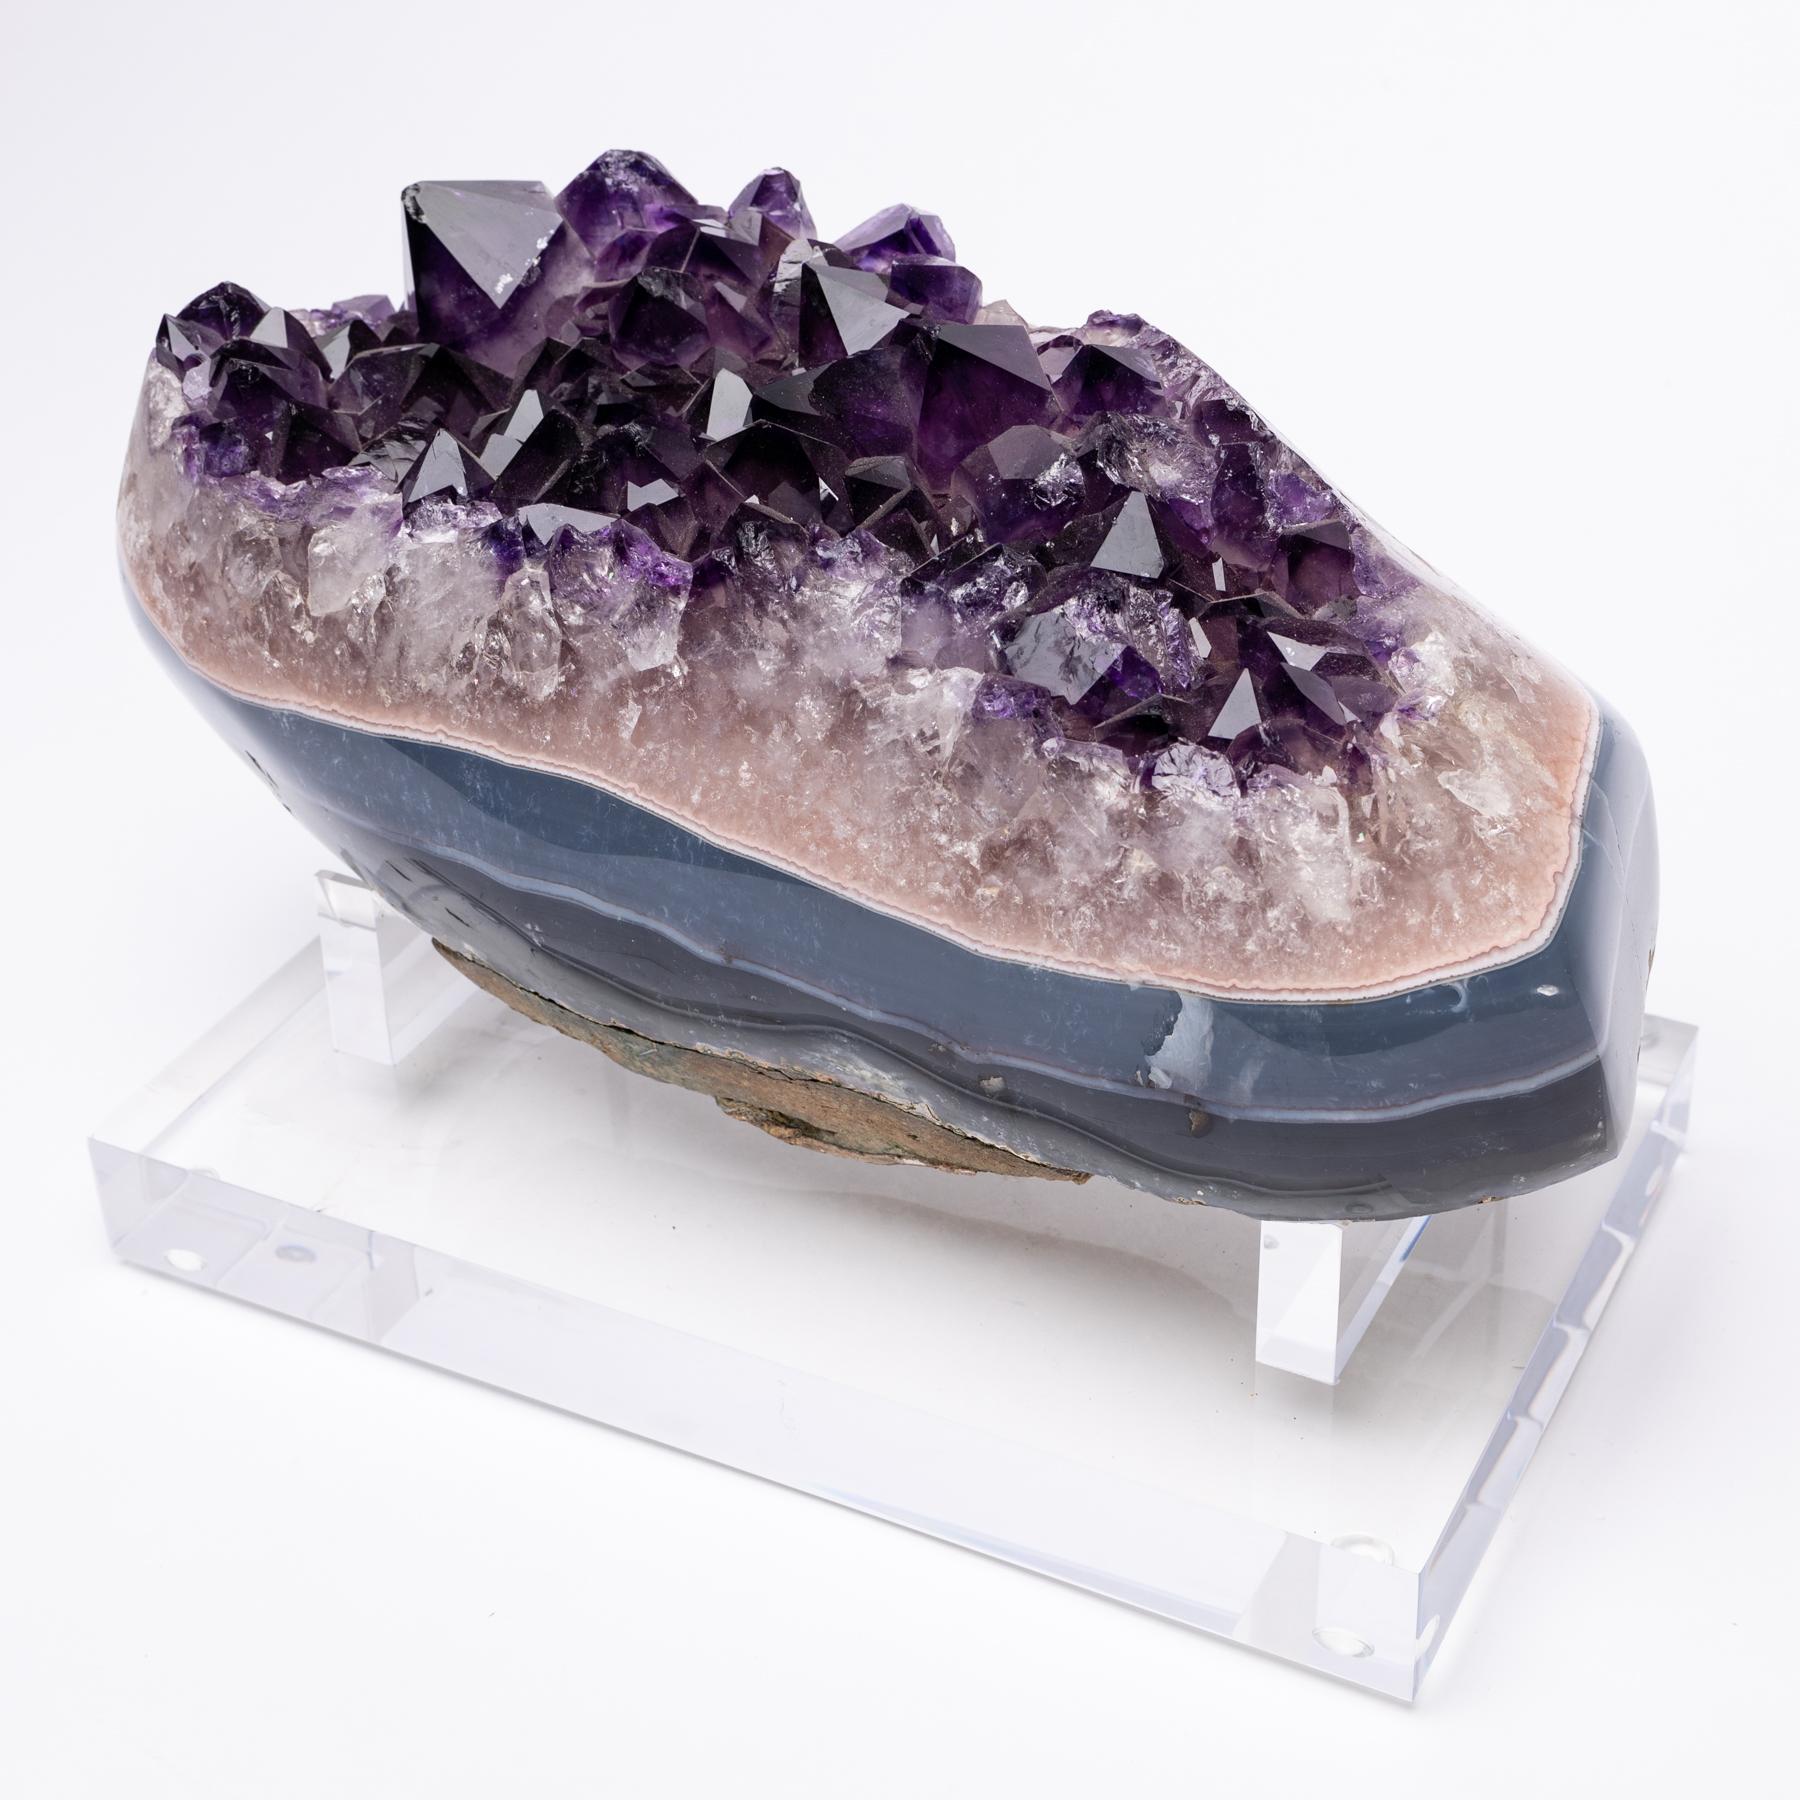 Uruguay Polished Agate with Amethysts Quartz Crystals Cluster on Acrylic Base 1